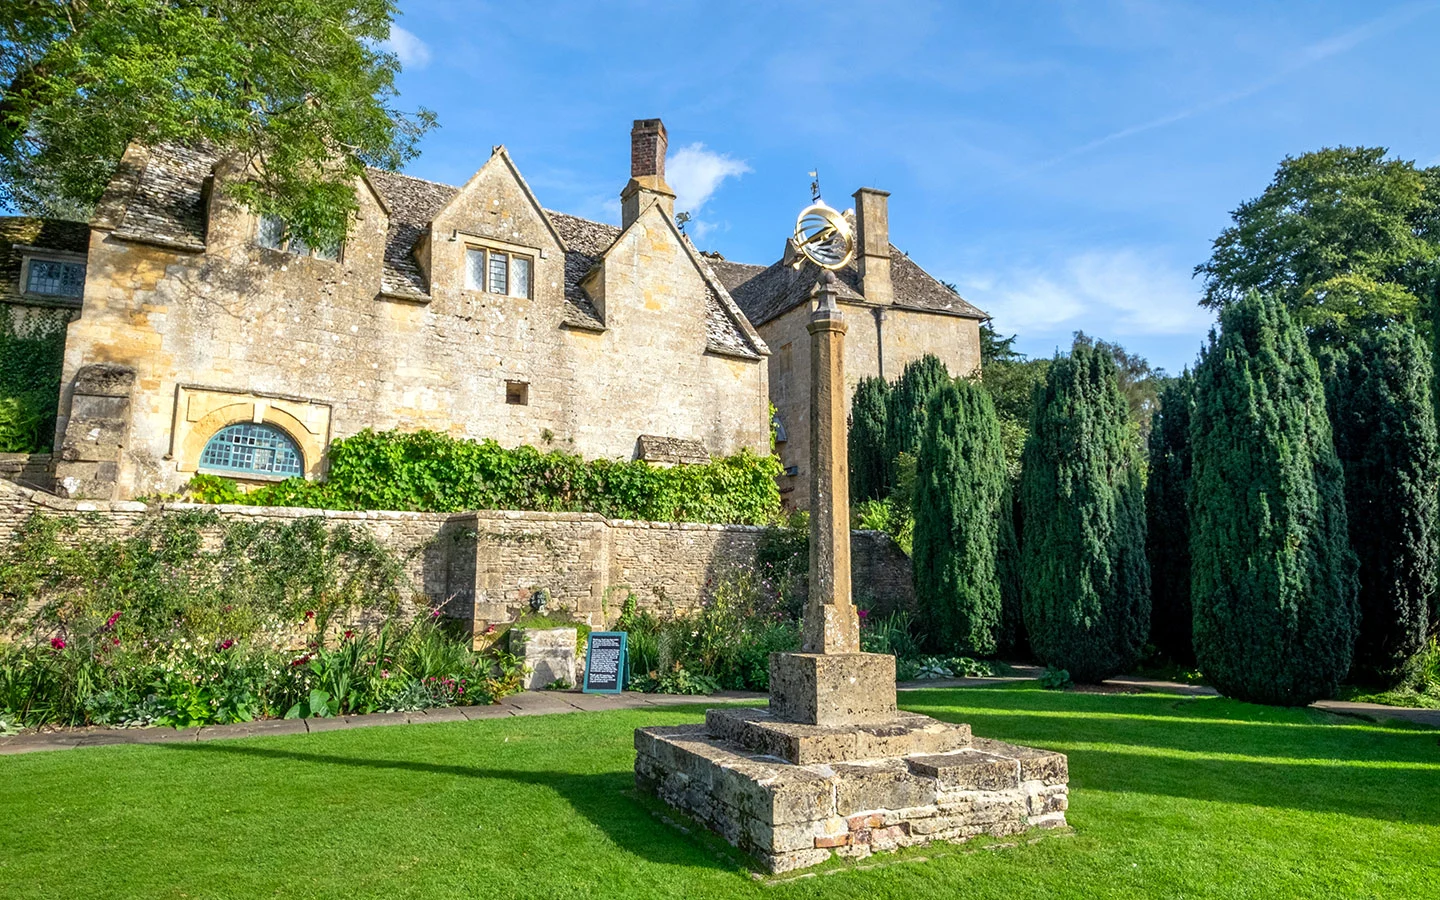 Snowshill Manor and Garden in the Cotswolds